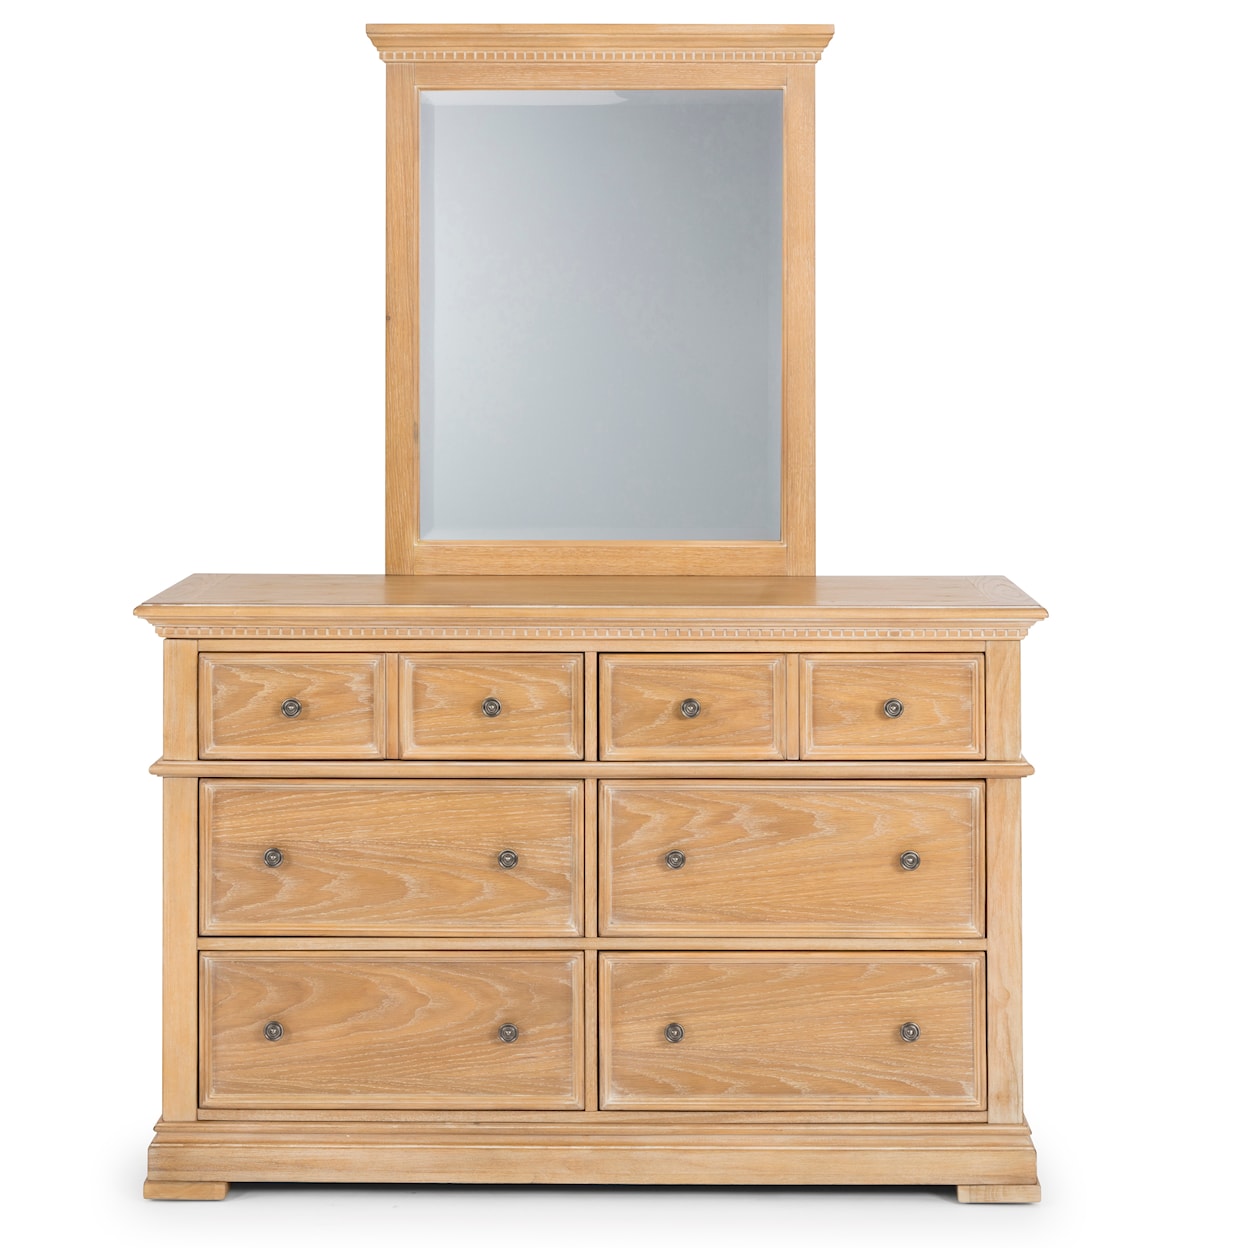 homestyles Manor House Dresser with Mirror